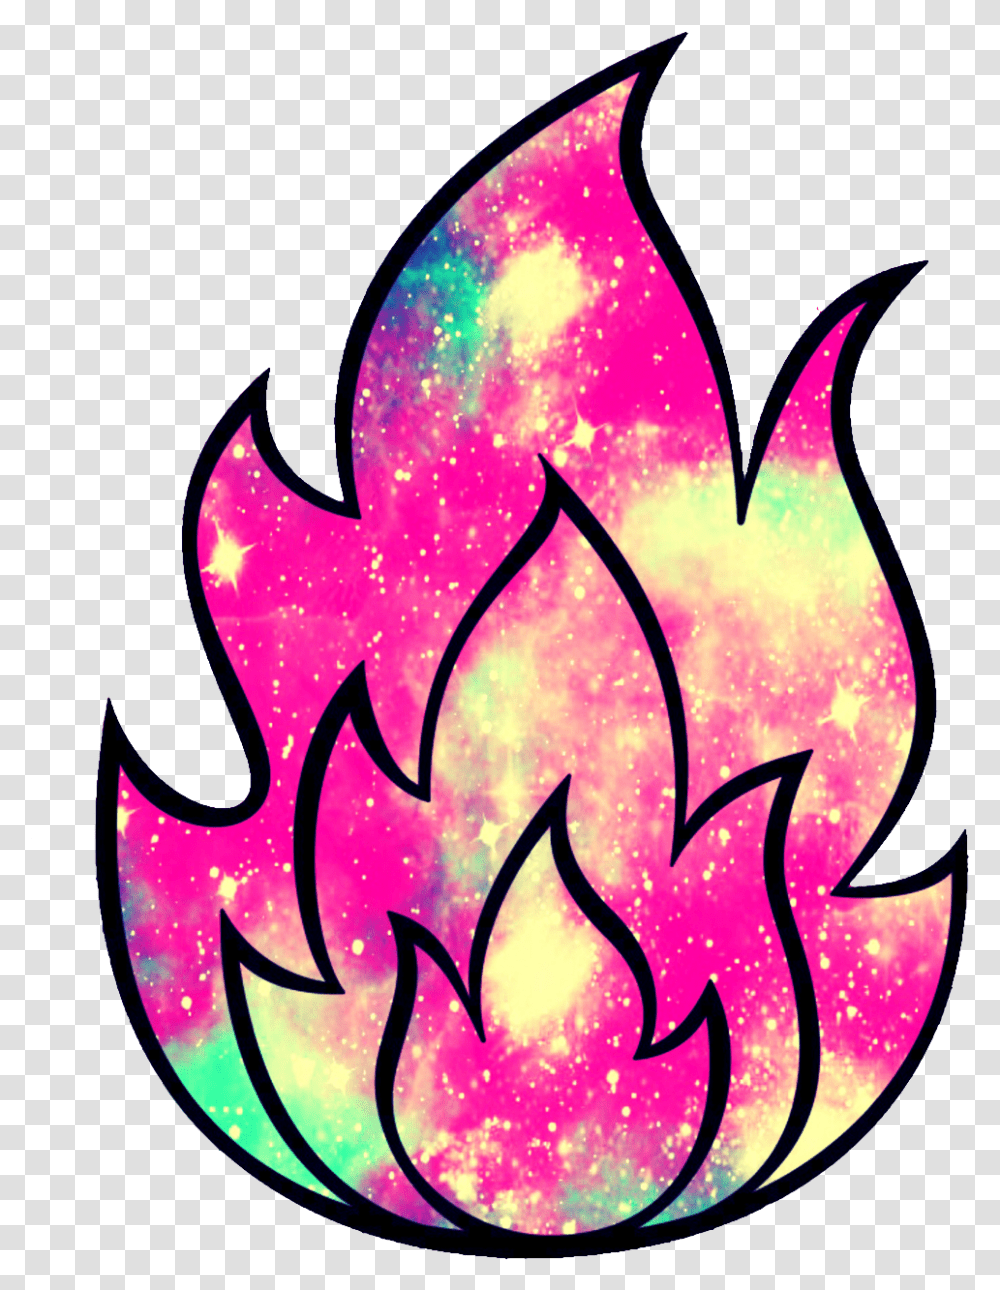 Fire Emoji Cute Flame Sticker Flame Fire Coloring Pages, Ornament, Pattern, Fractal, Light Transparent Png